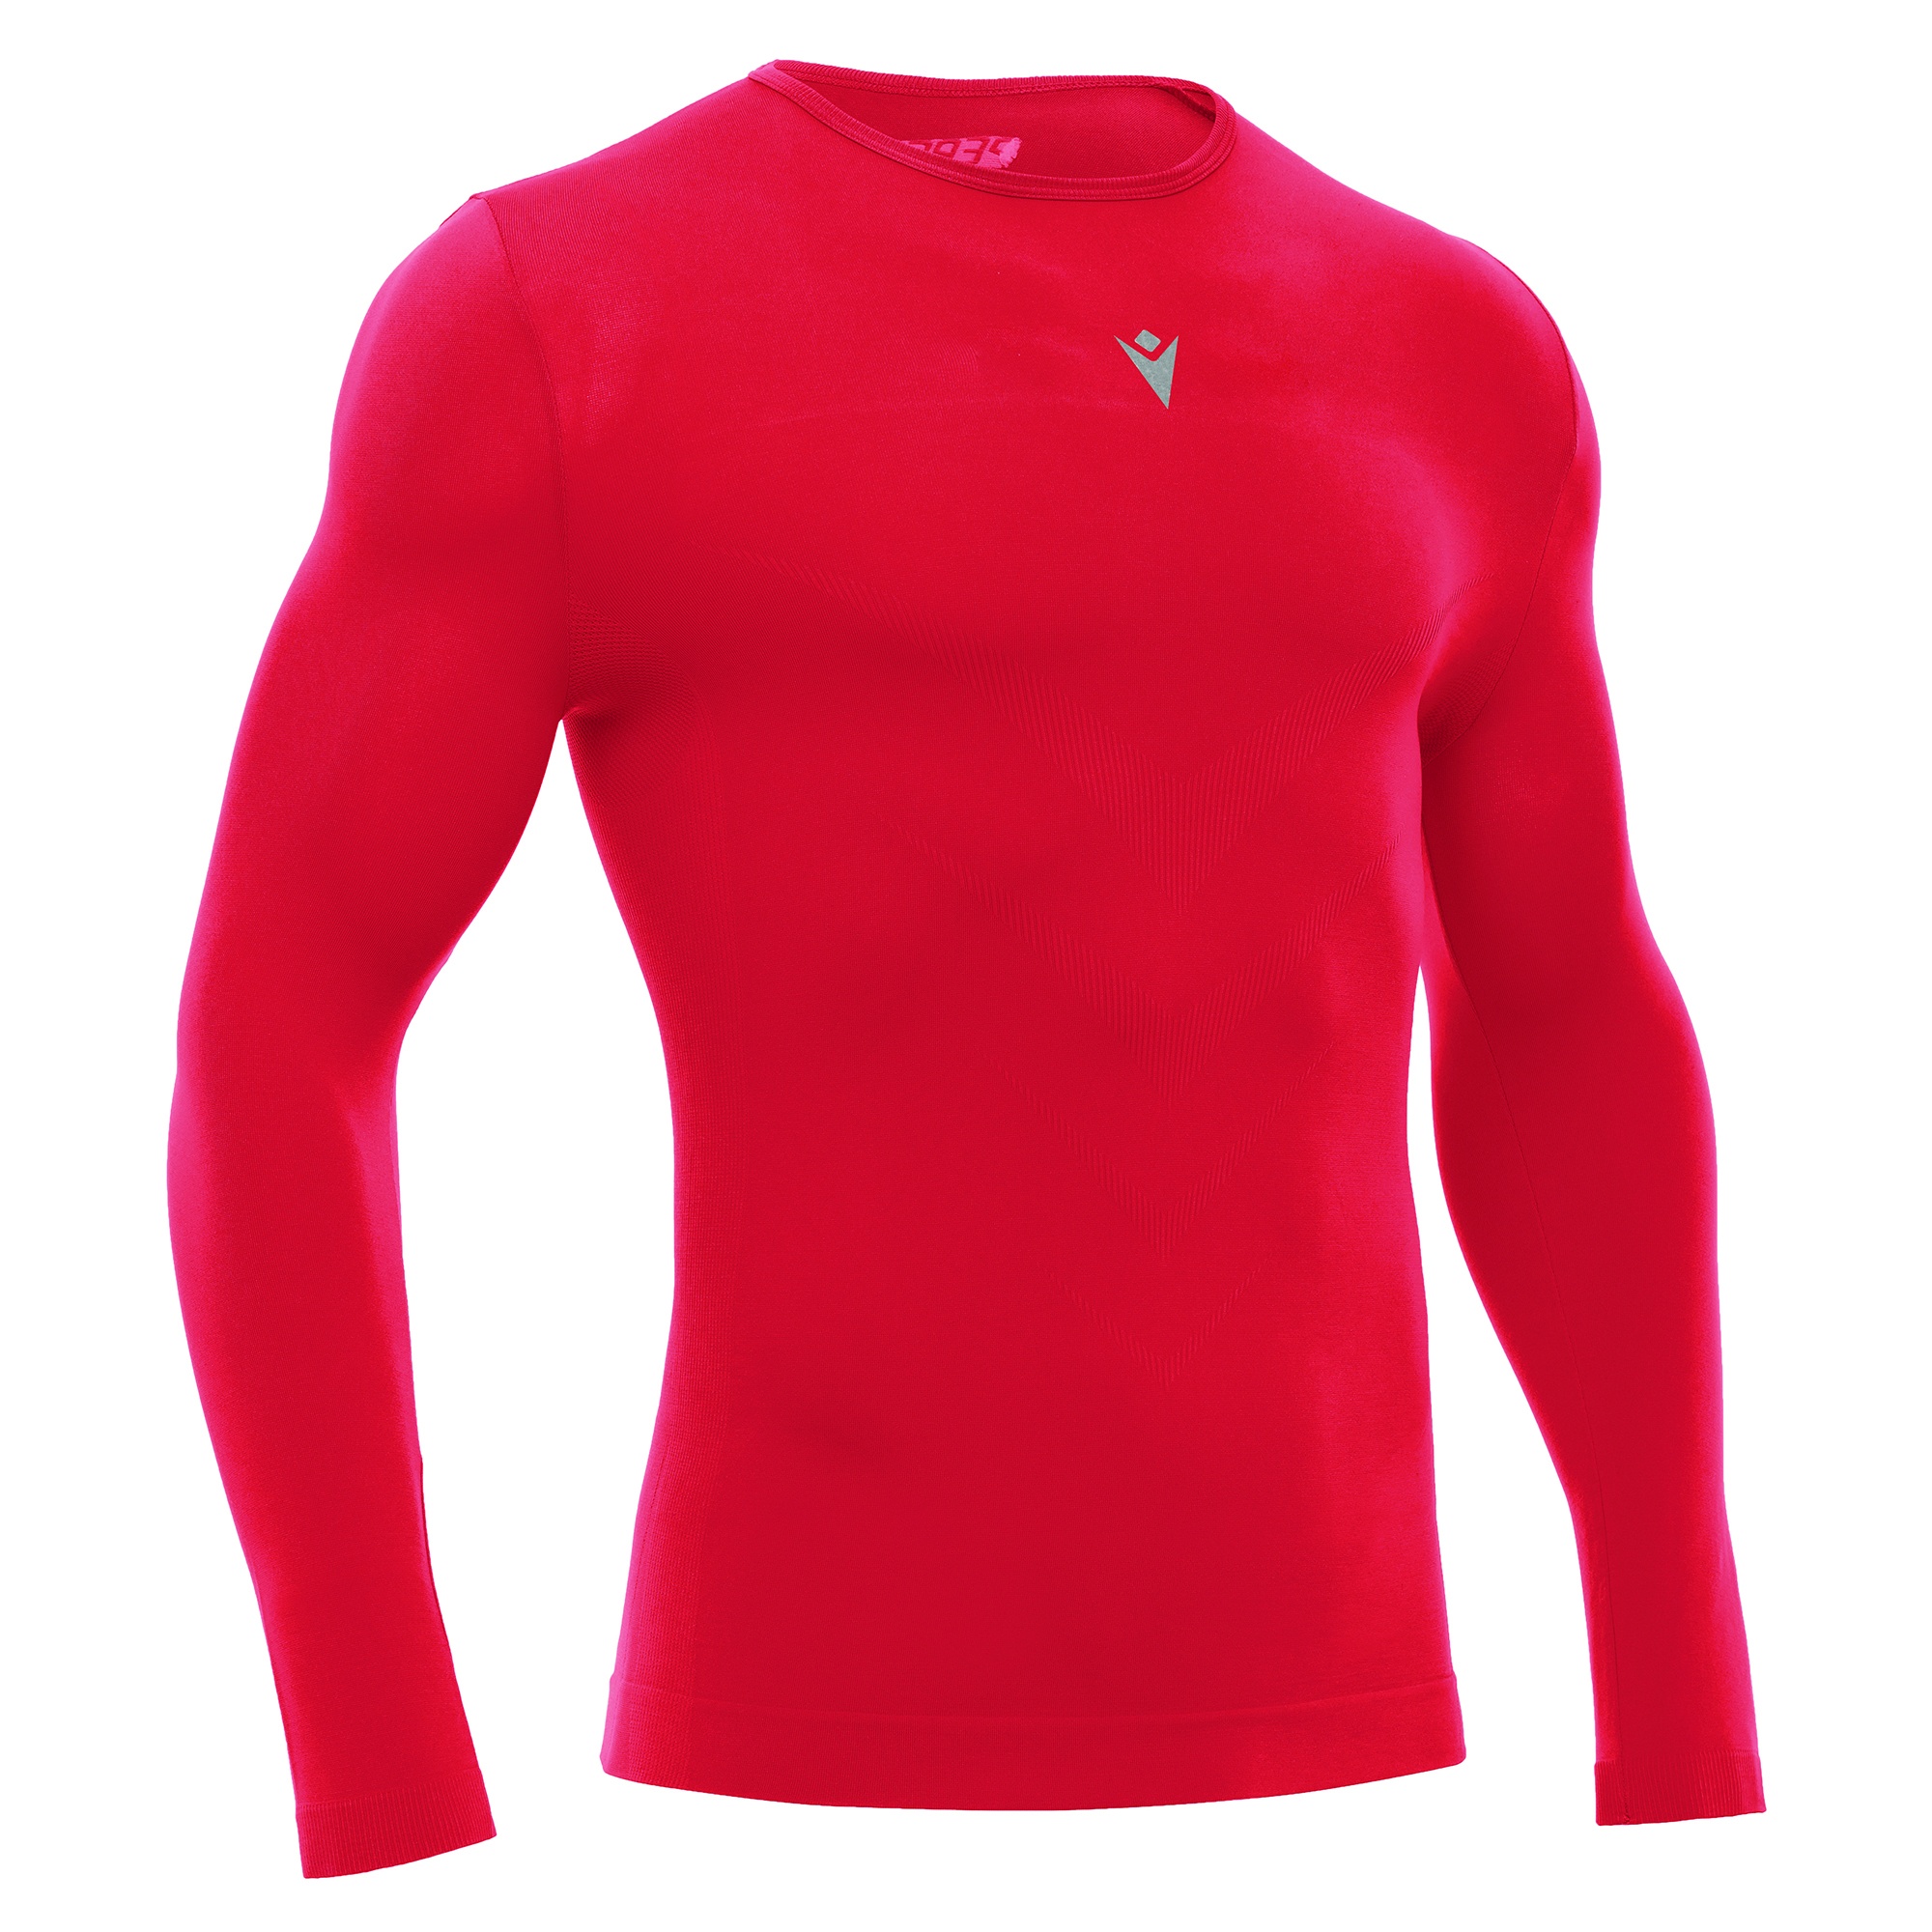 PERFORMANCE TECH UNDERWEAR TOP LS RED, XS Macron.rs